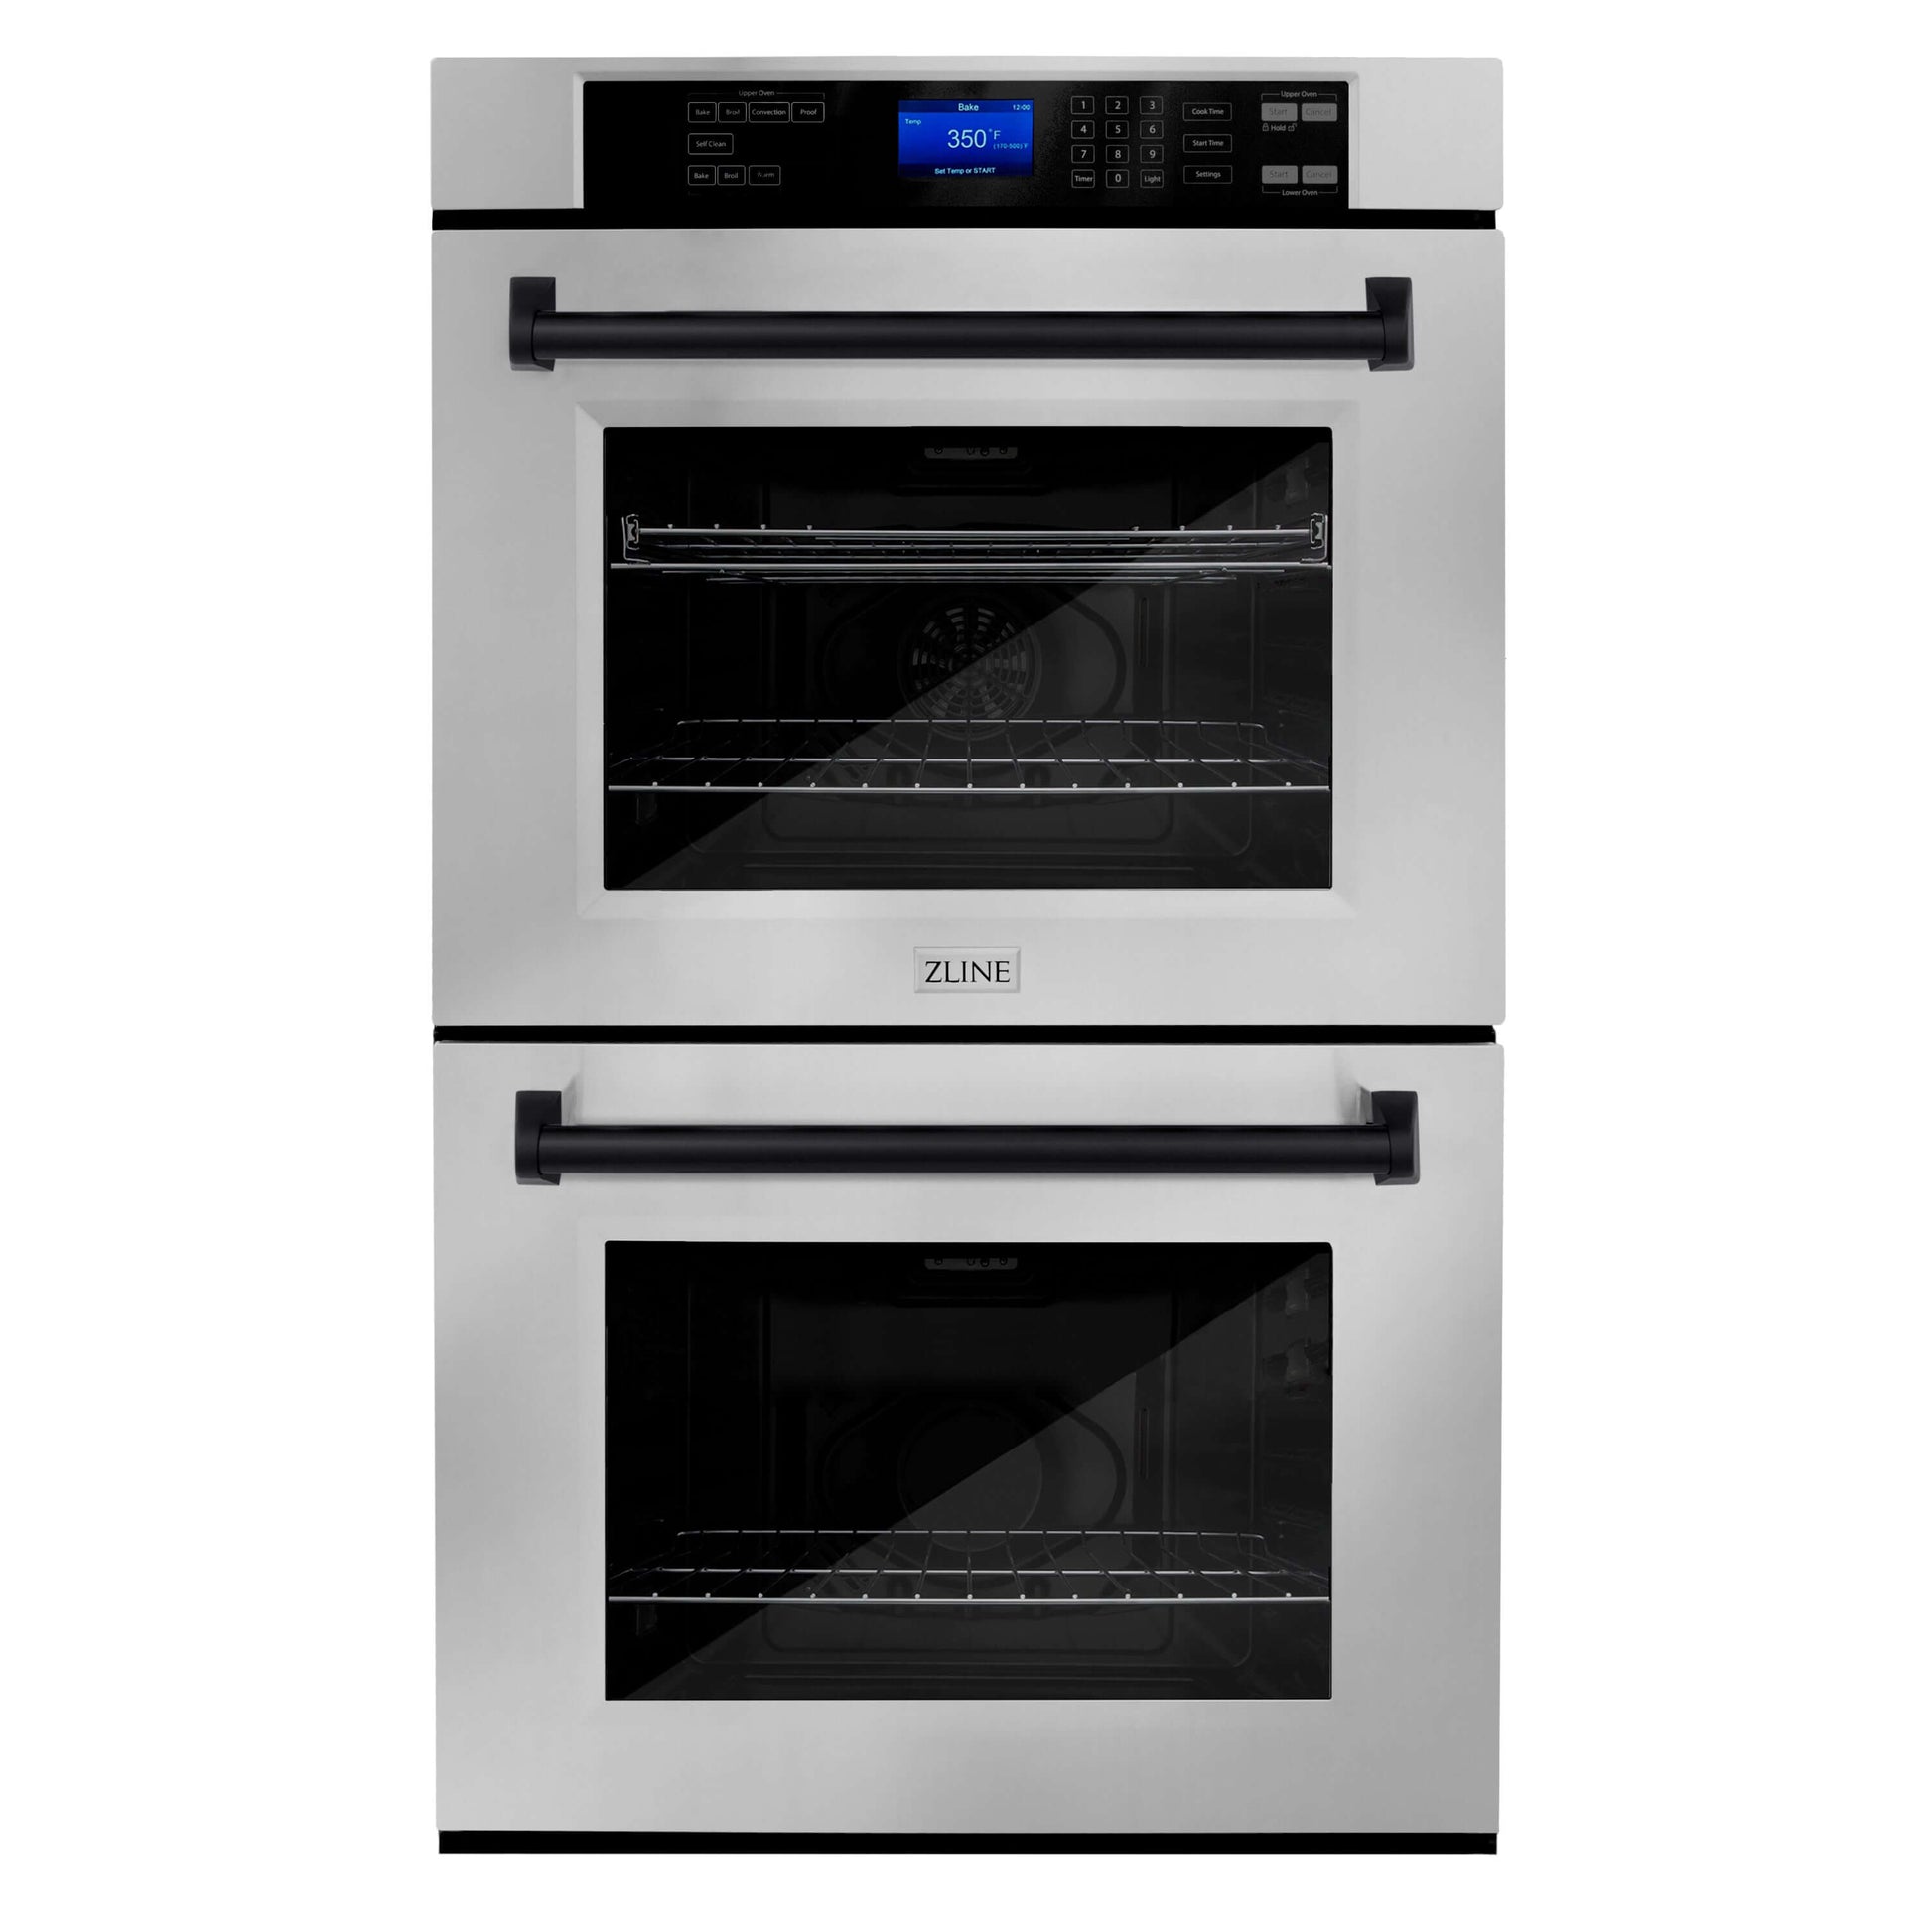 ZLINE Autograph Edition 30" Electric Double Wall Oven - Stainless Steel with Accents, Self Clean, True Convection